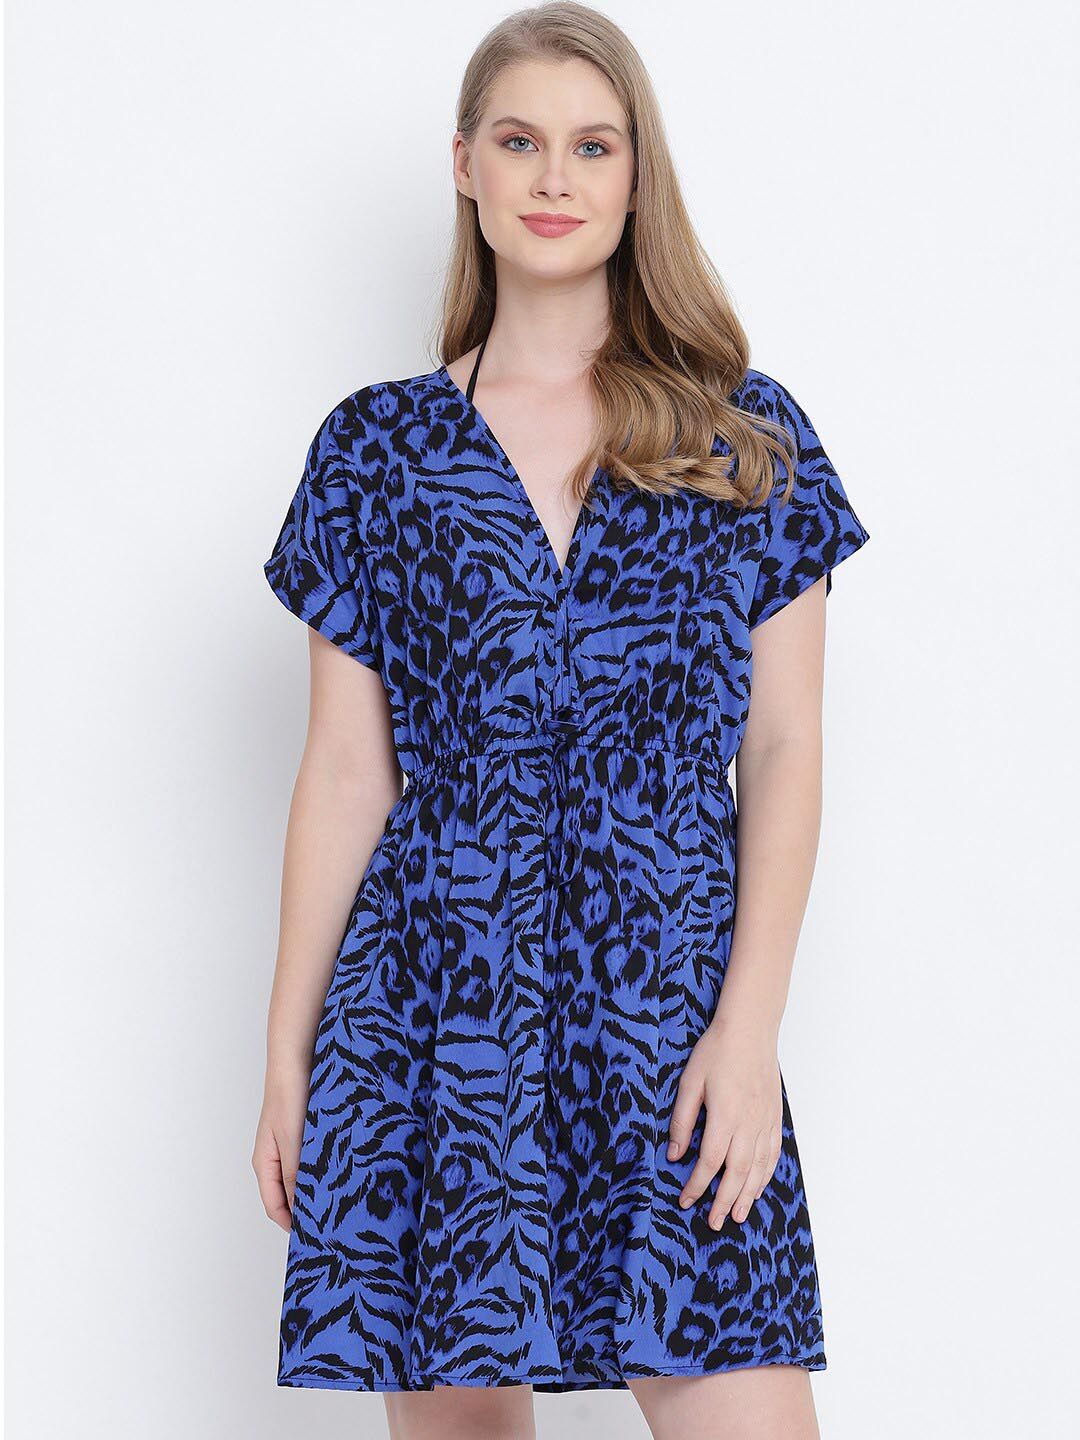 Oxolloxo Women Blue & Black Printed Kaftan Cover-Up Dress Price in India